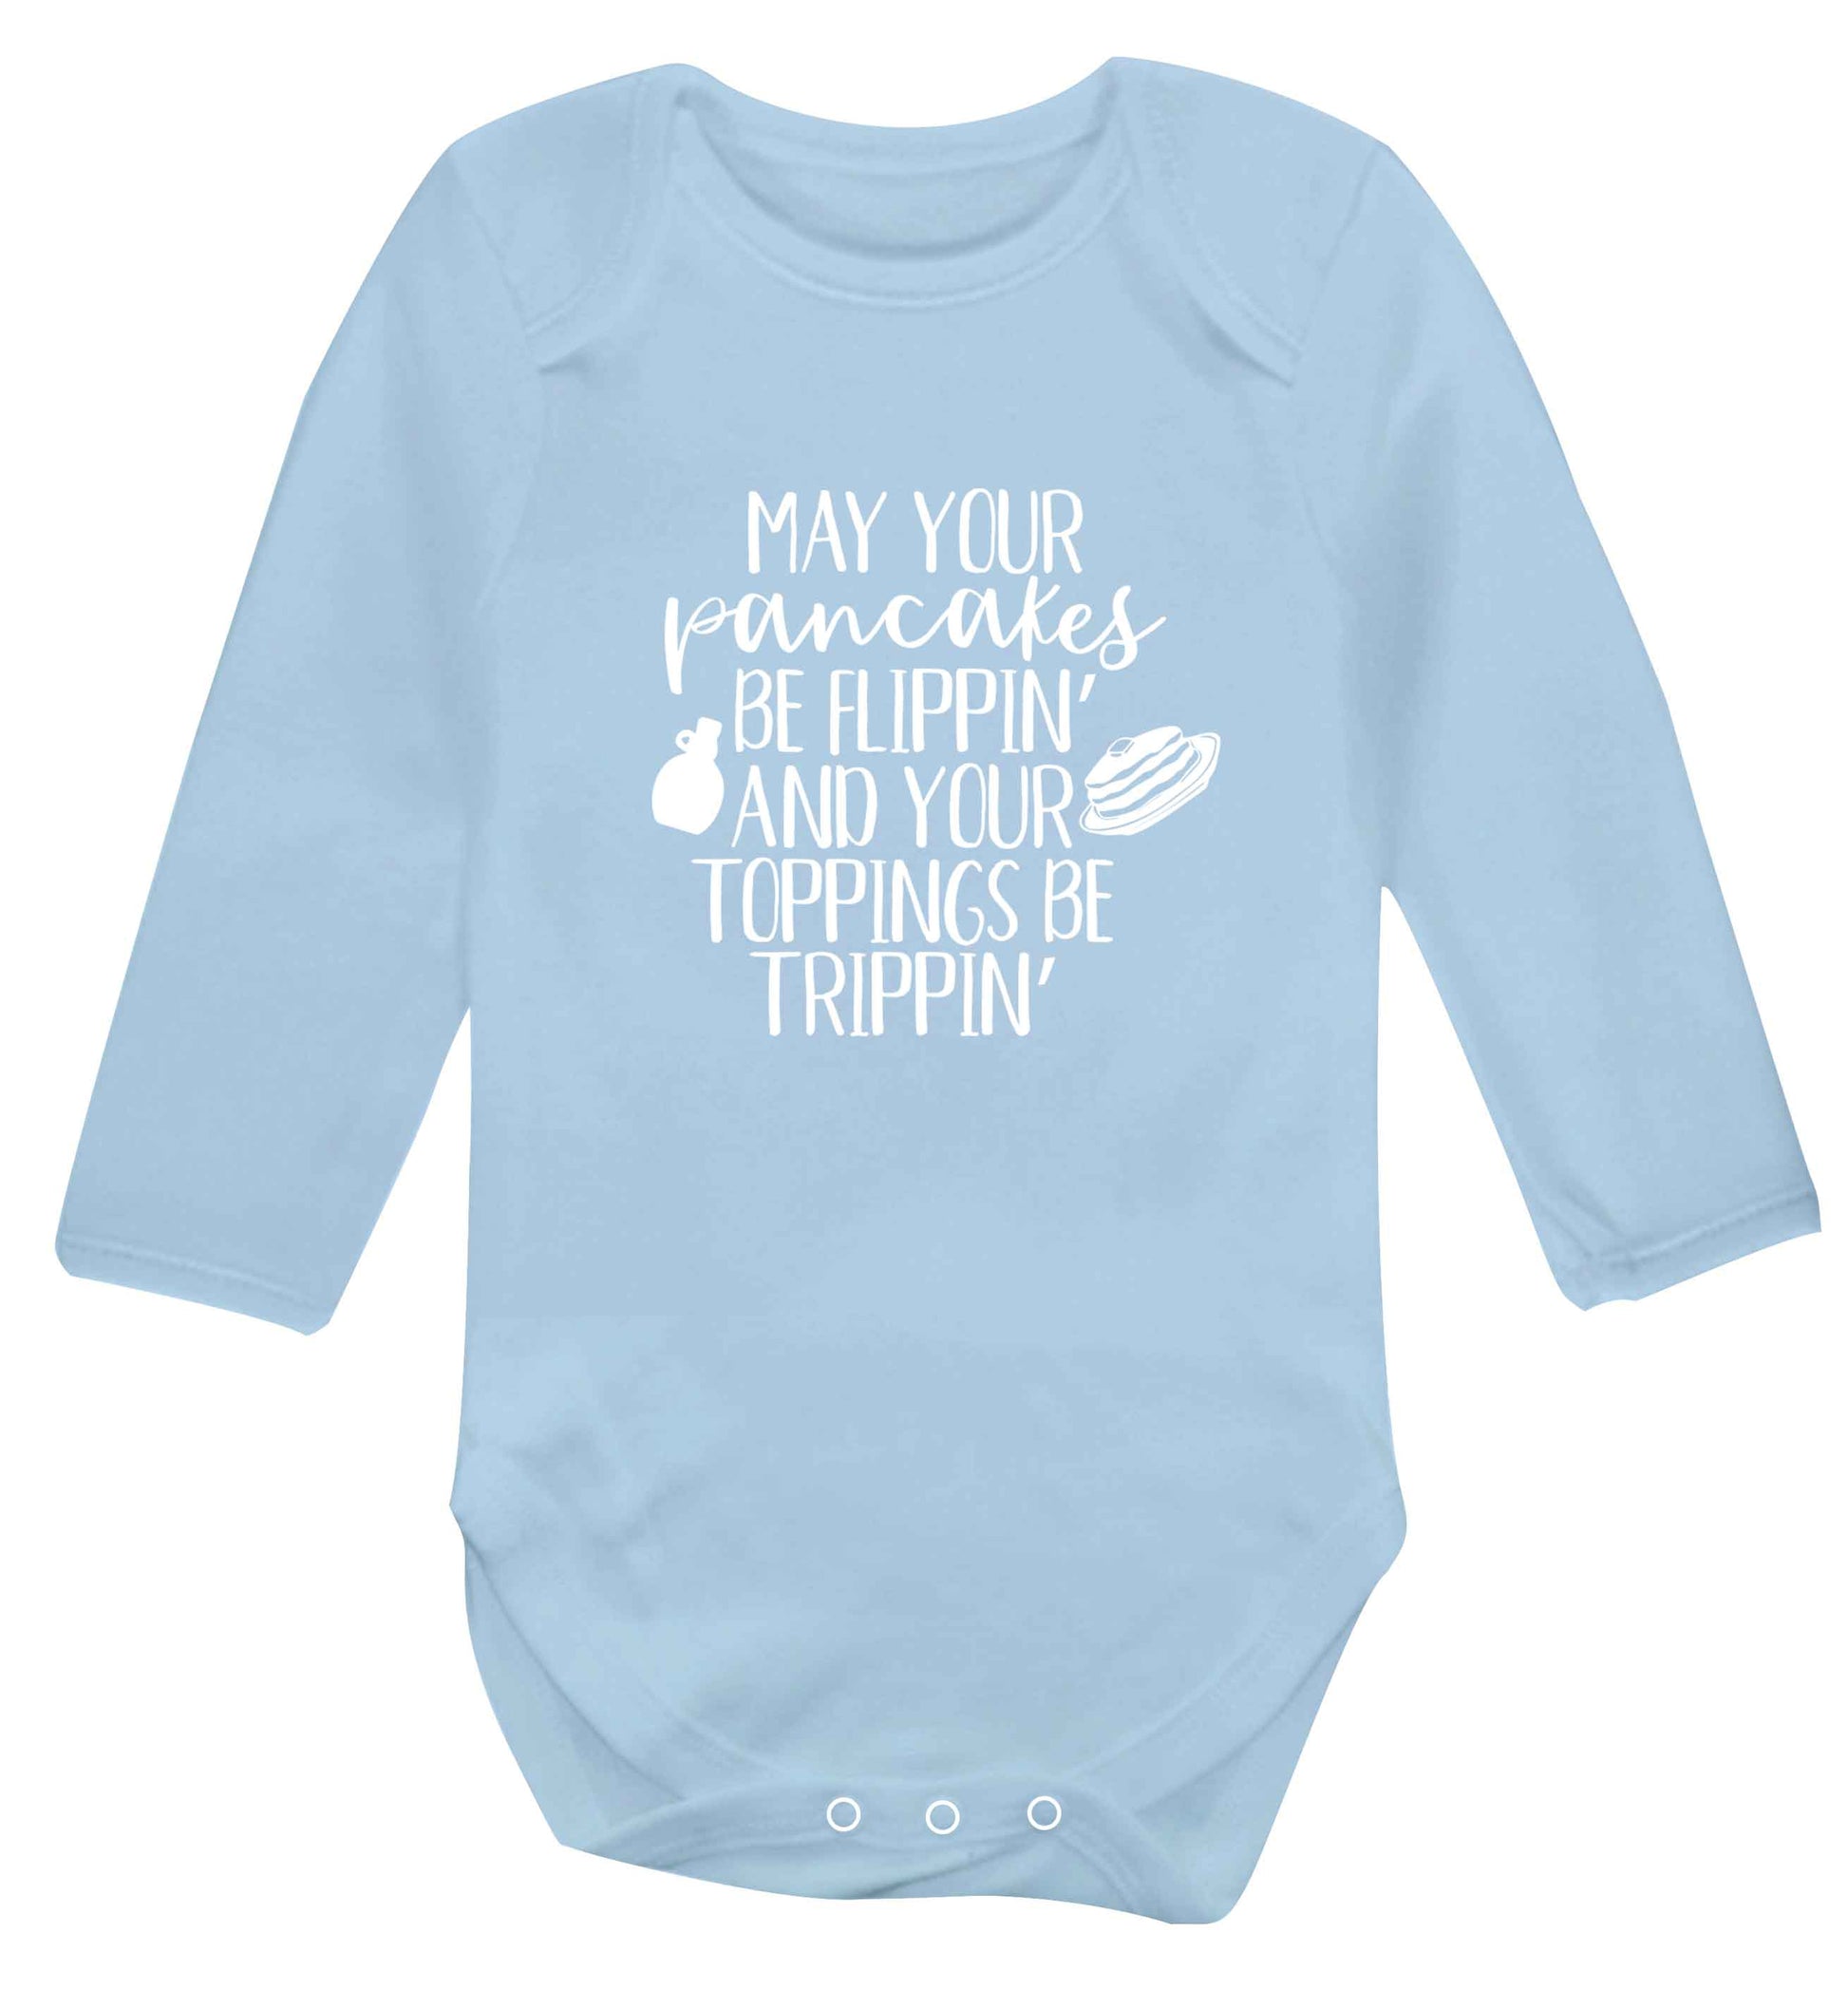 May your pancakes be flippin' and your toppings be trippin' baby vest long sleeved pale blue 6-12 months